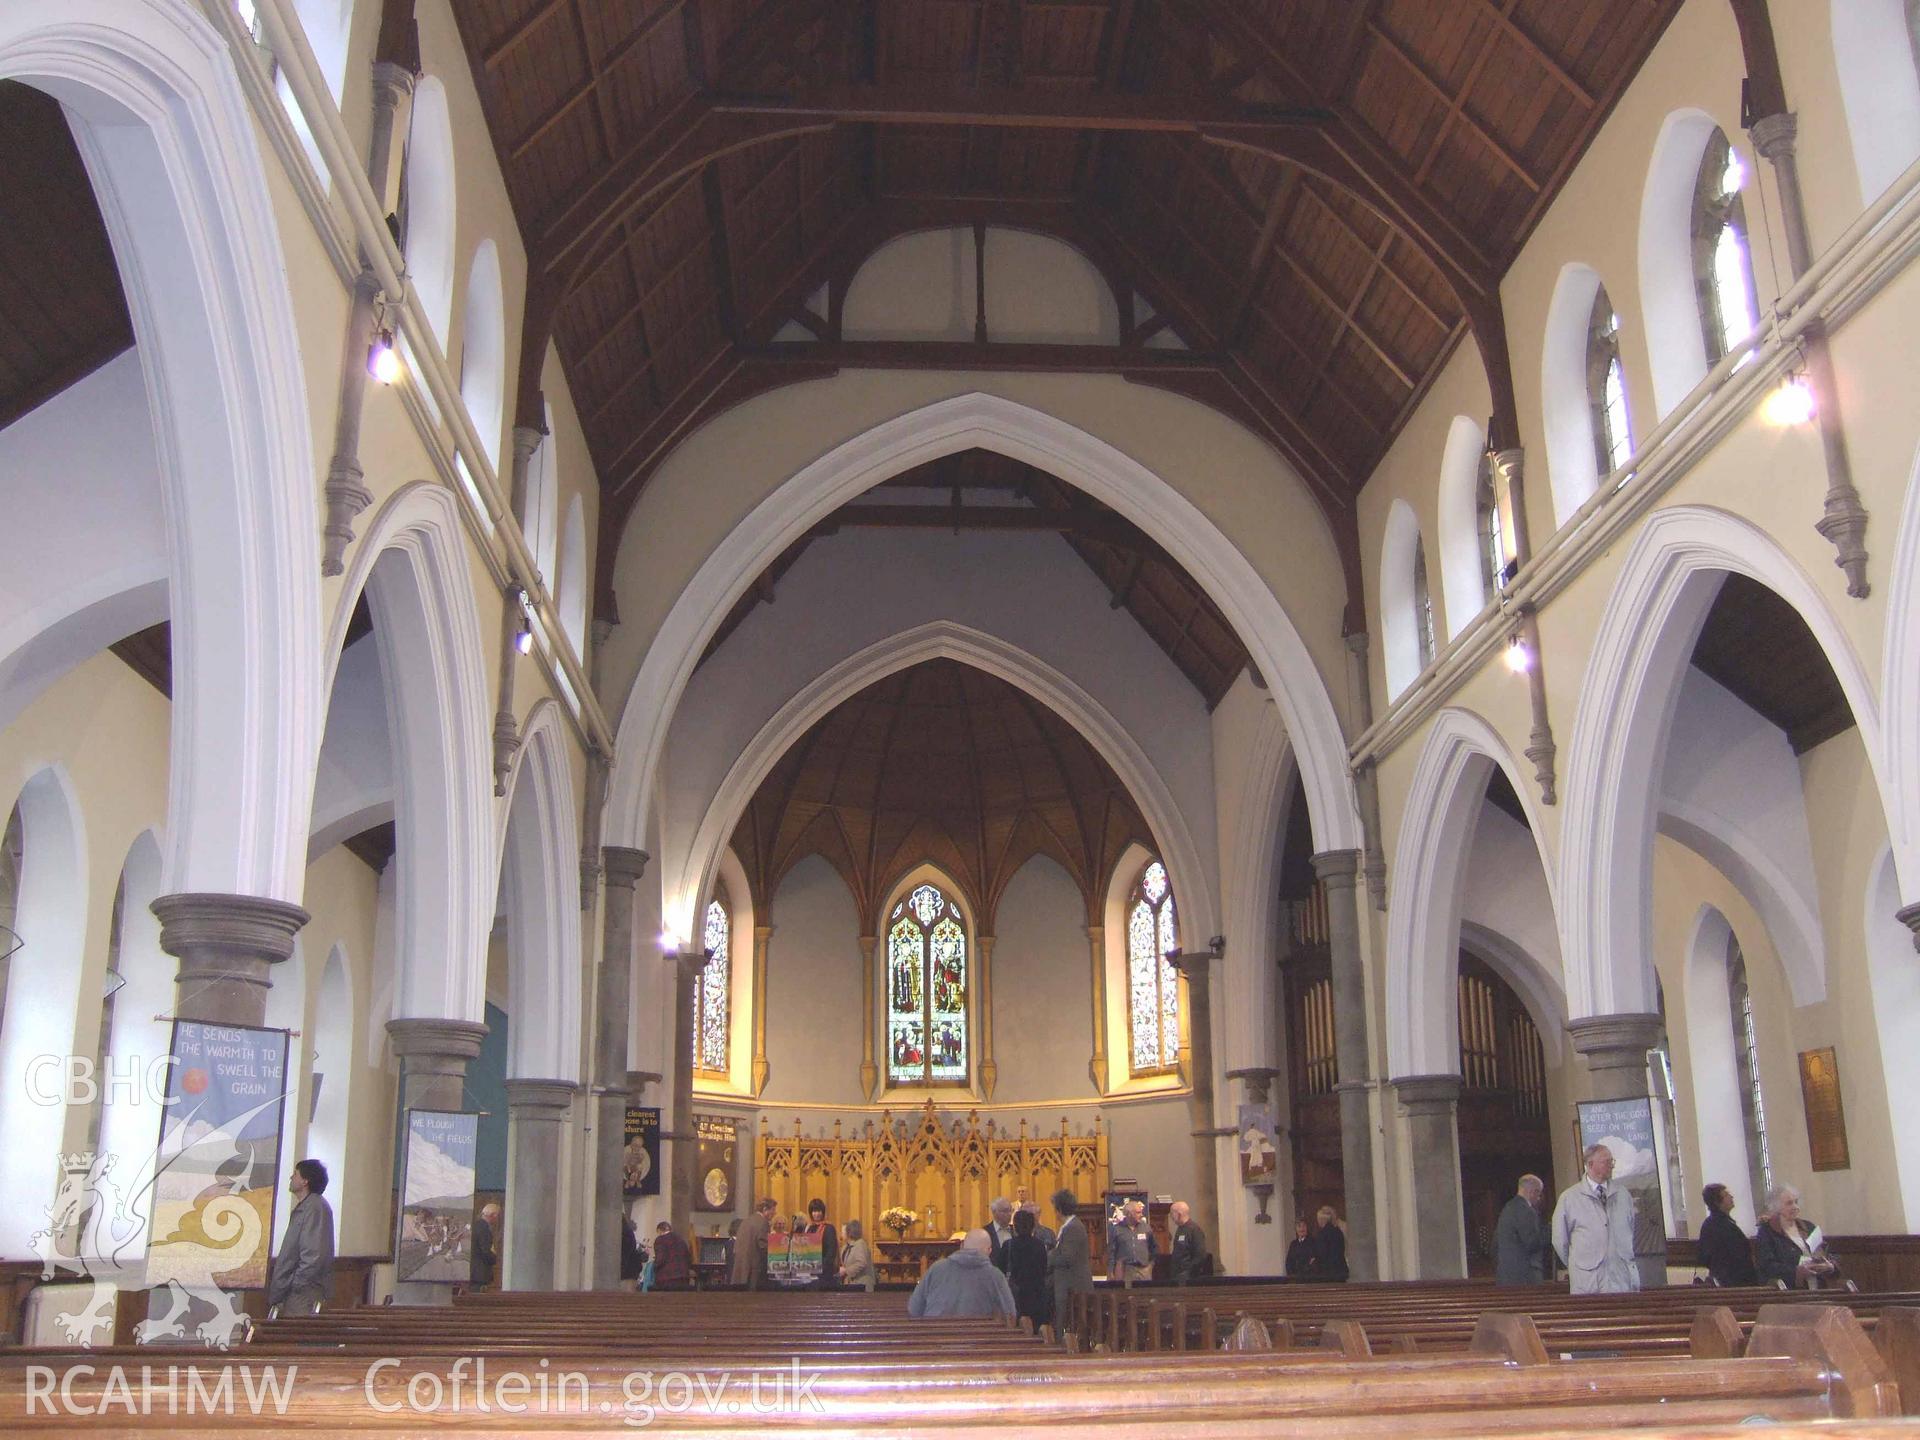 Interior of church & arcades looking south-east.